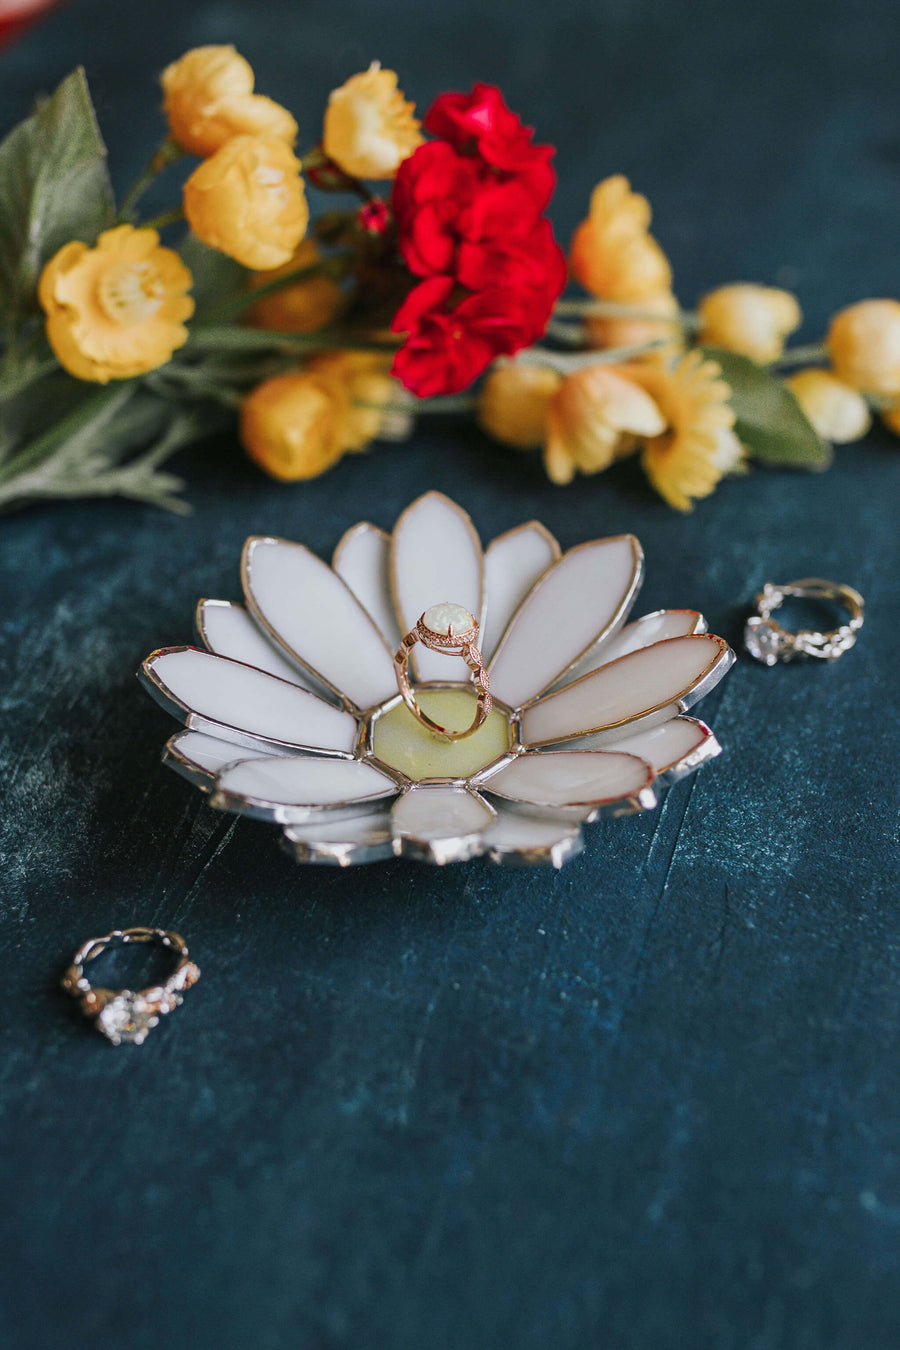 stained-glass-daisy-wedding-ring-dish-by-waen